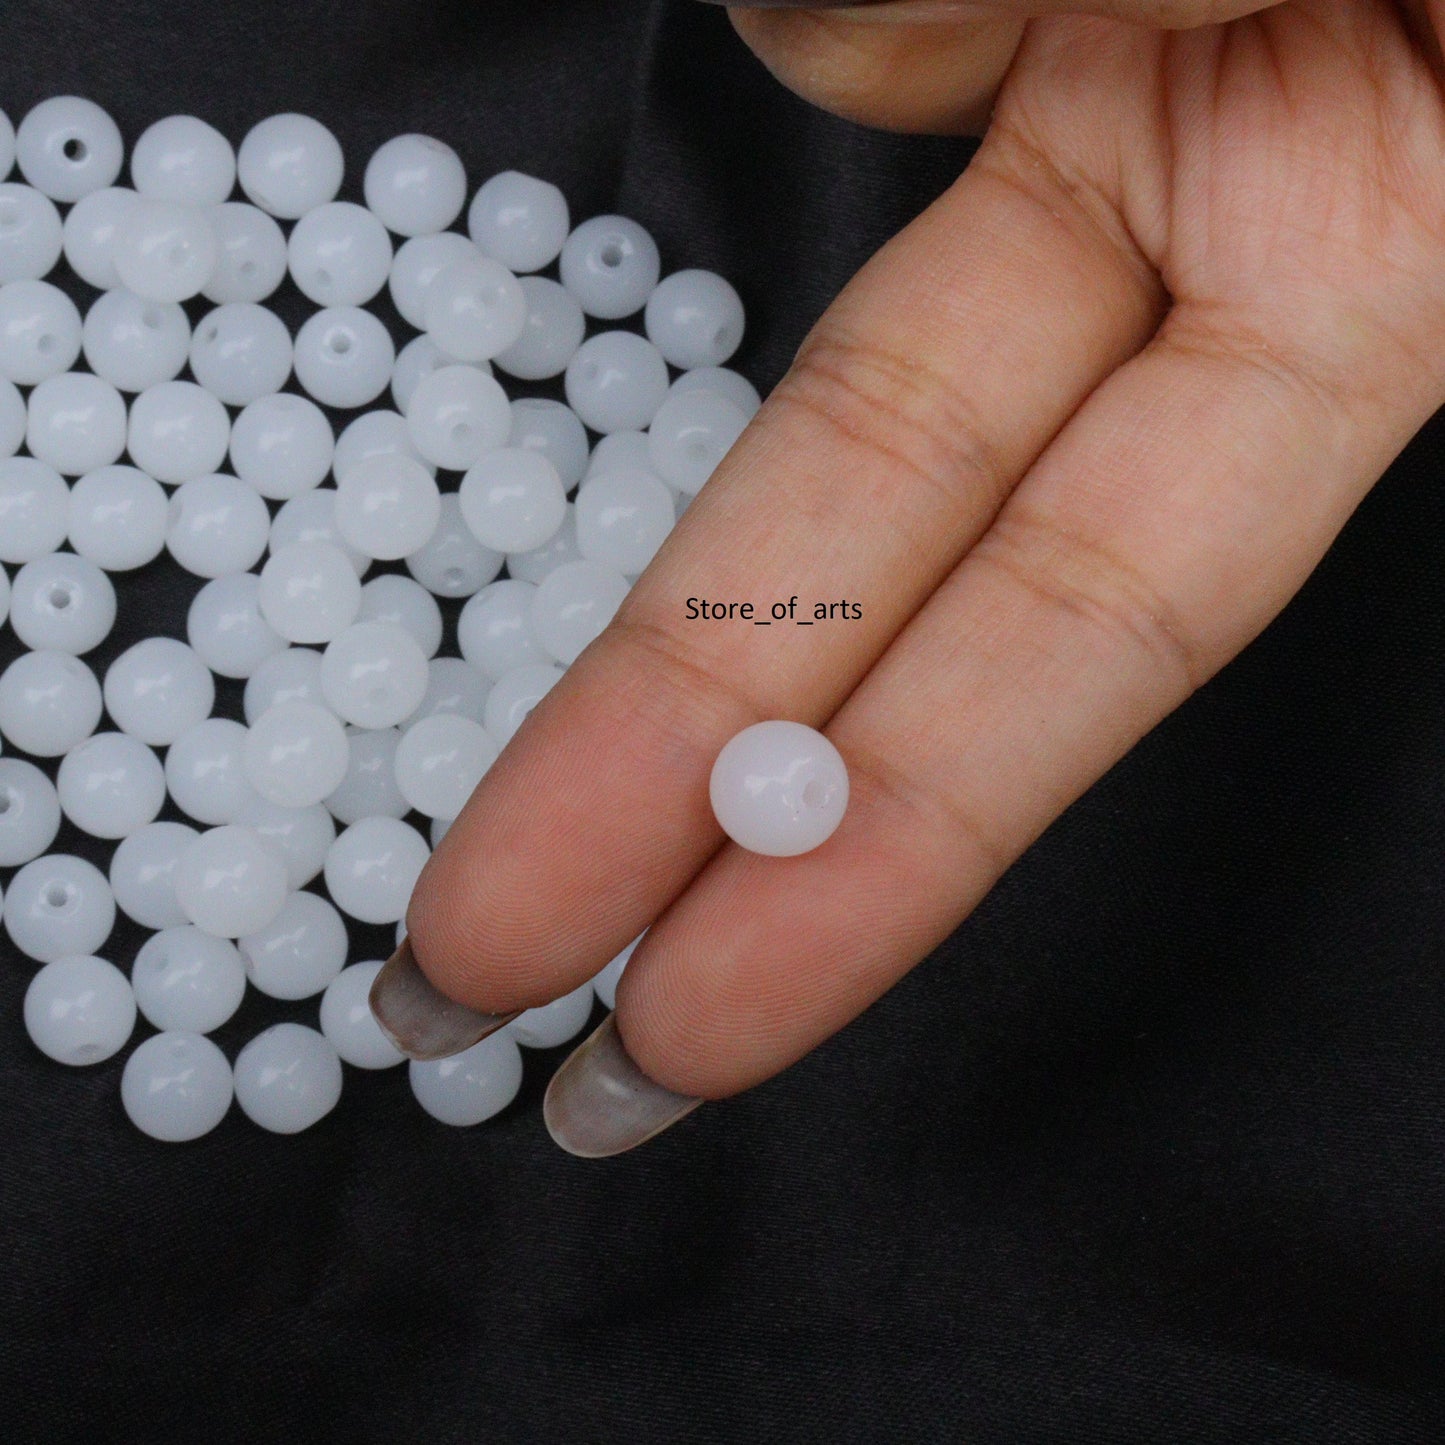 Glass beads of 8mm White and Black beads combo for jewelry making, Each pack contains 100pcs (Total 200pcs)